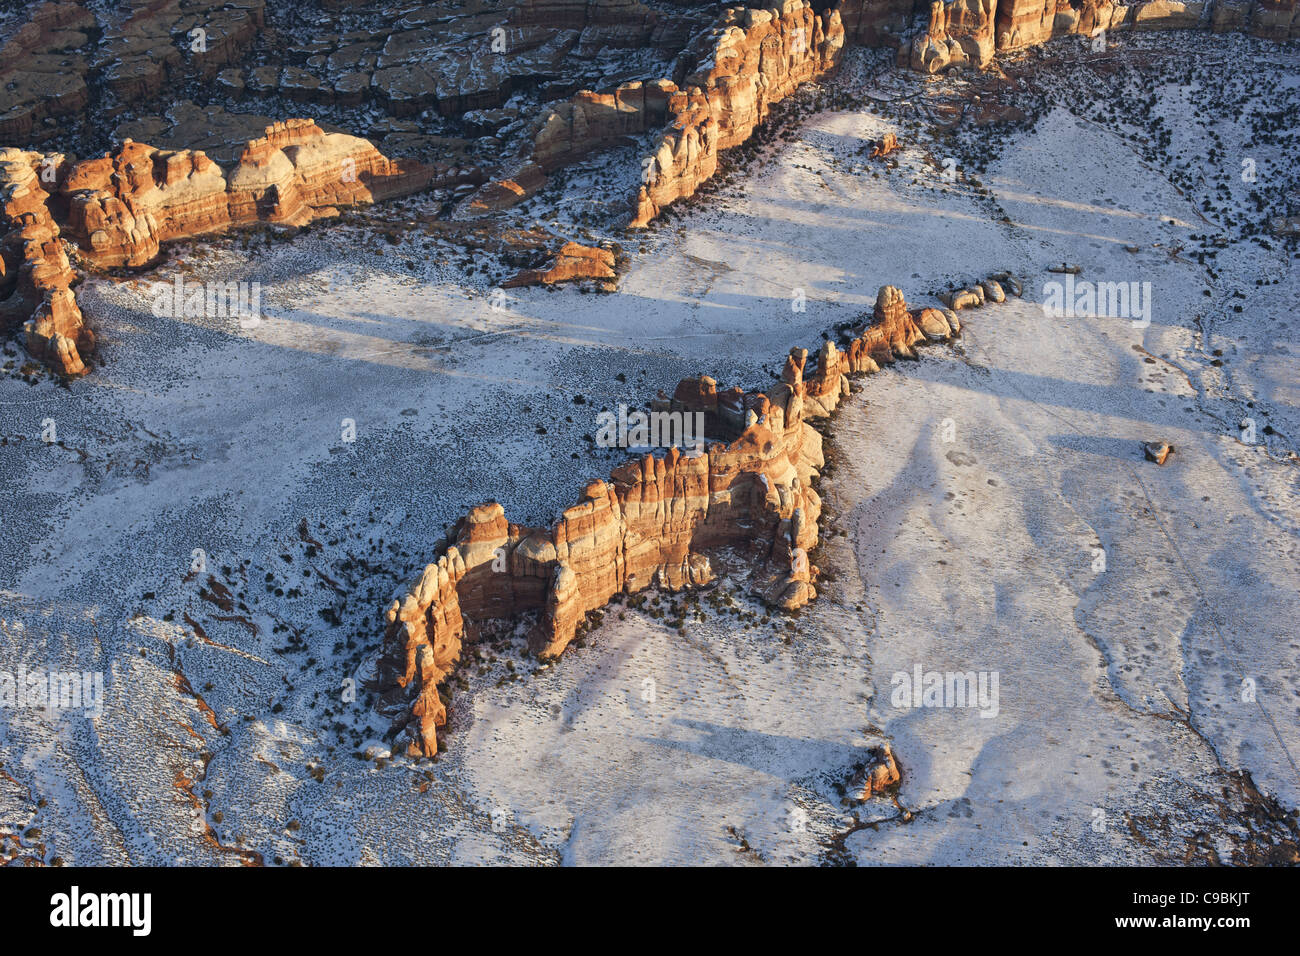 AERIAL VIEW. Sandstone outcrop in a snowy field. Chesler Park Peak, Canyonlands National Park, San Juan County, Utah, USA. Stock Photo